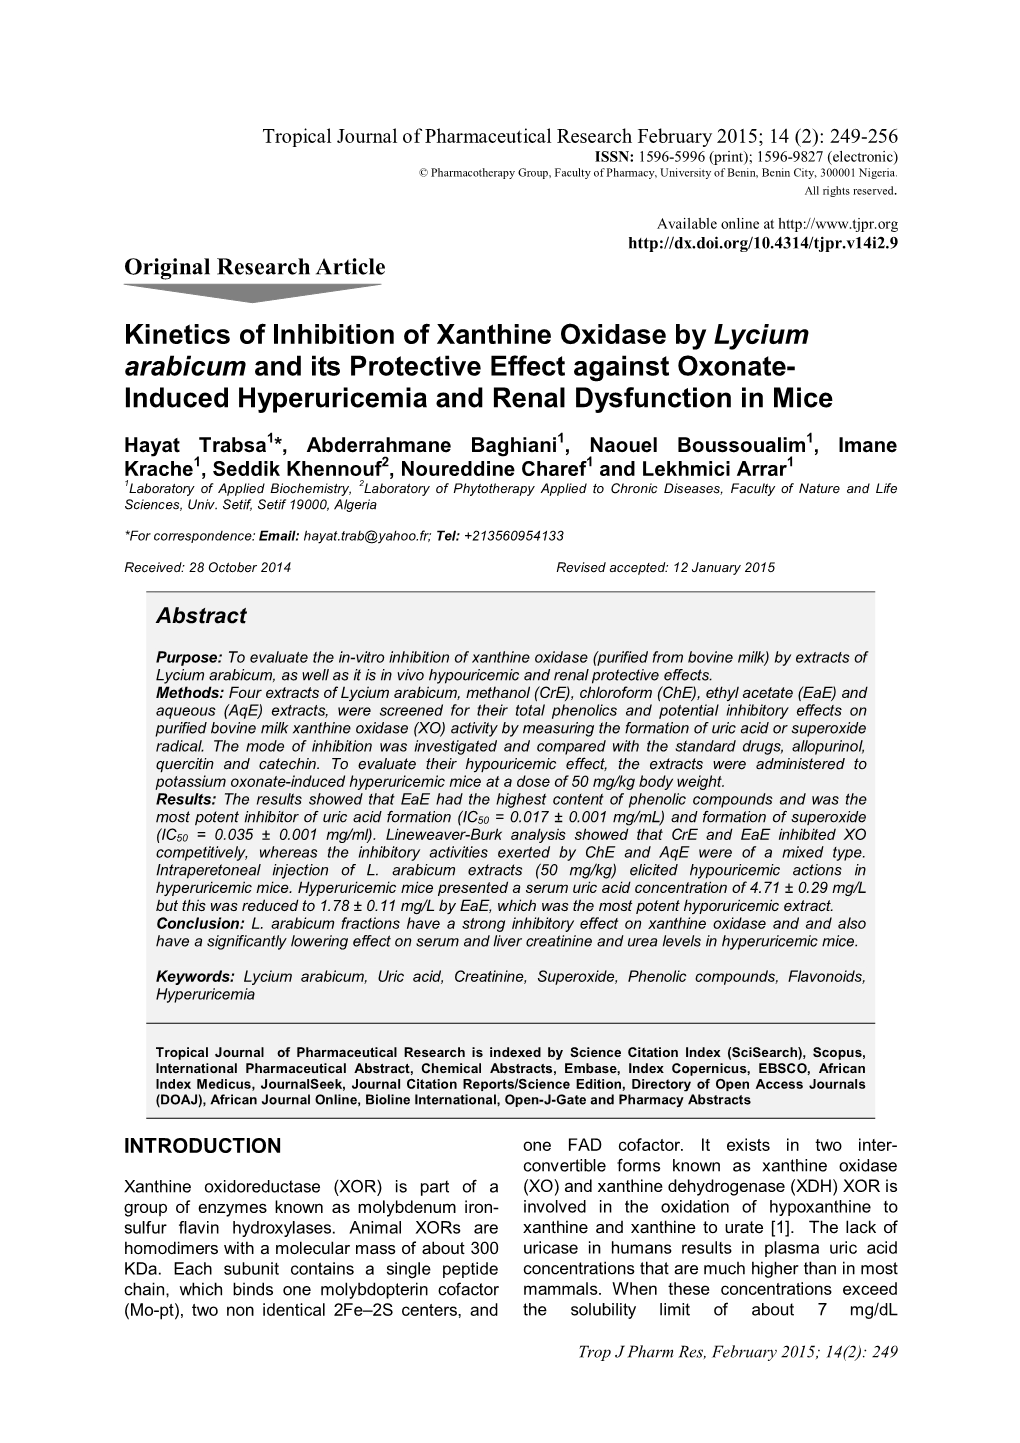 Kinetics of Inhibition of Xanthine Oxidase by Lycium Arabicum and Its Protective Effect Against Oxonate- Induced Hyperuricemia and Renal Dysfunction in Mice